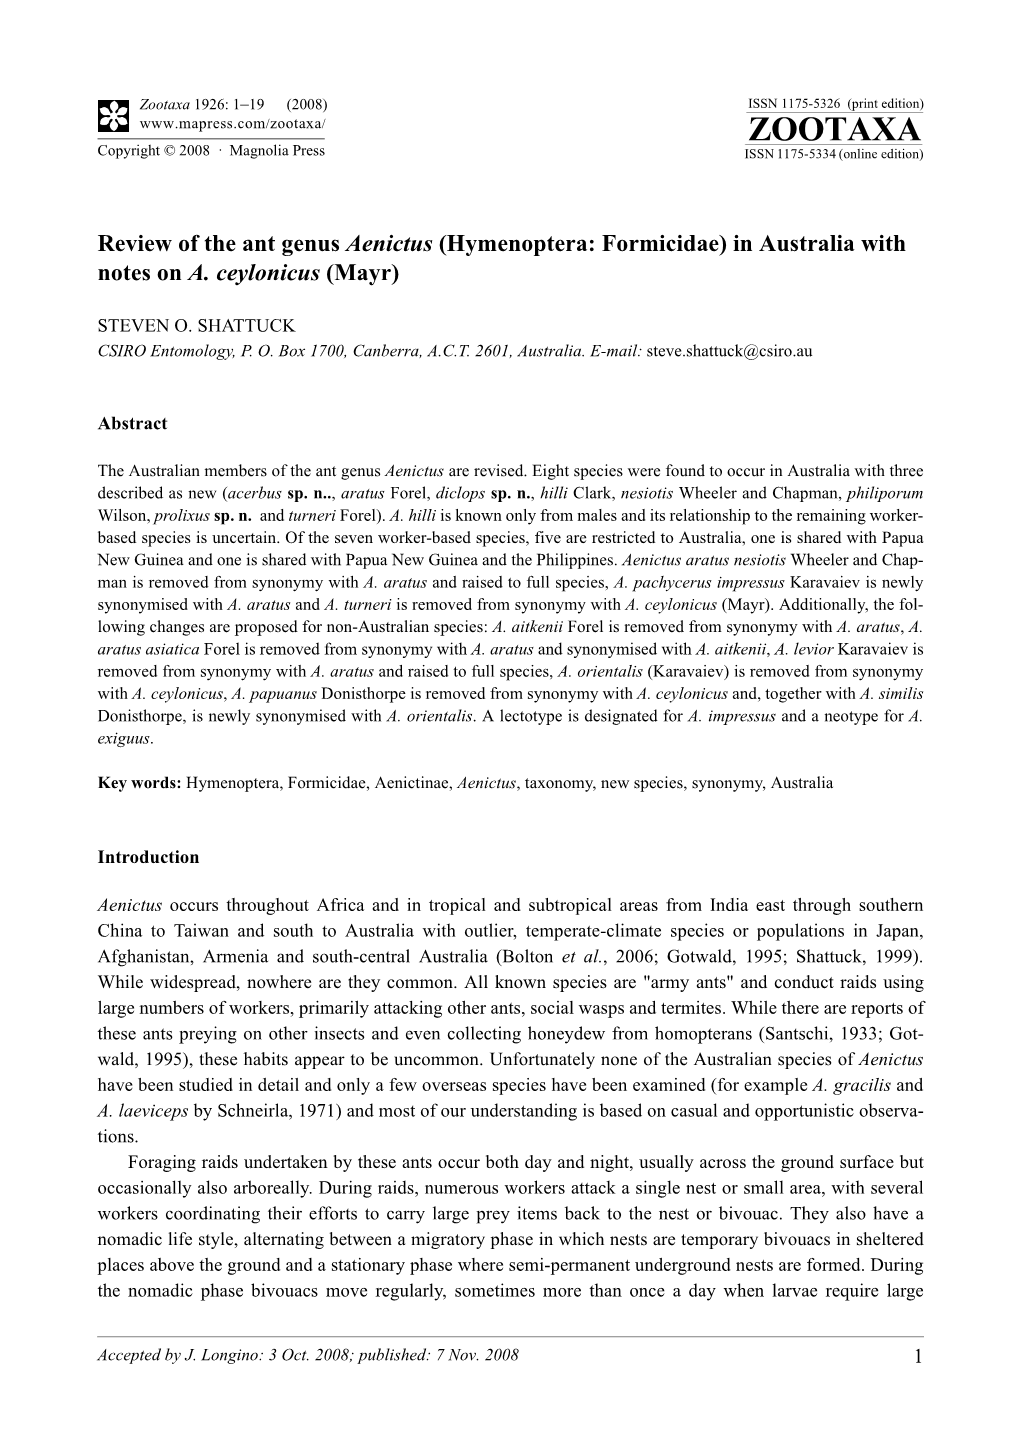 Zootaxa, Review of the Ant Genus Aenictus (Hymenoptera: Formicidae) in Australia With